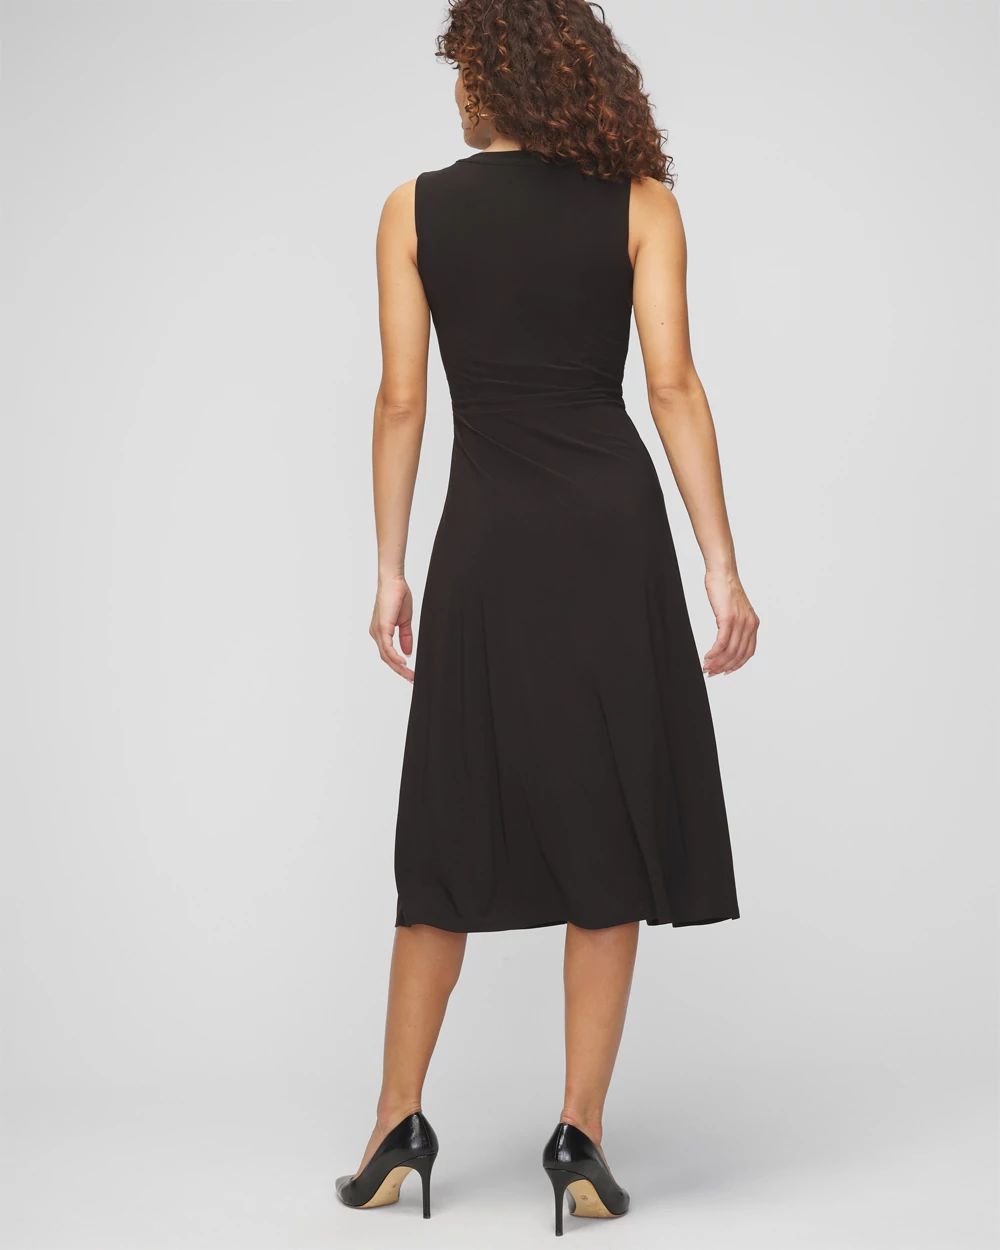 Sleeveless Matte Jersey Crest Button Midi Dress click to view larger image.